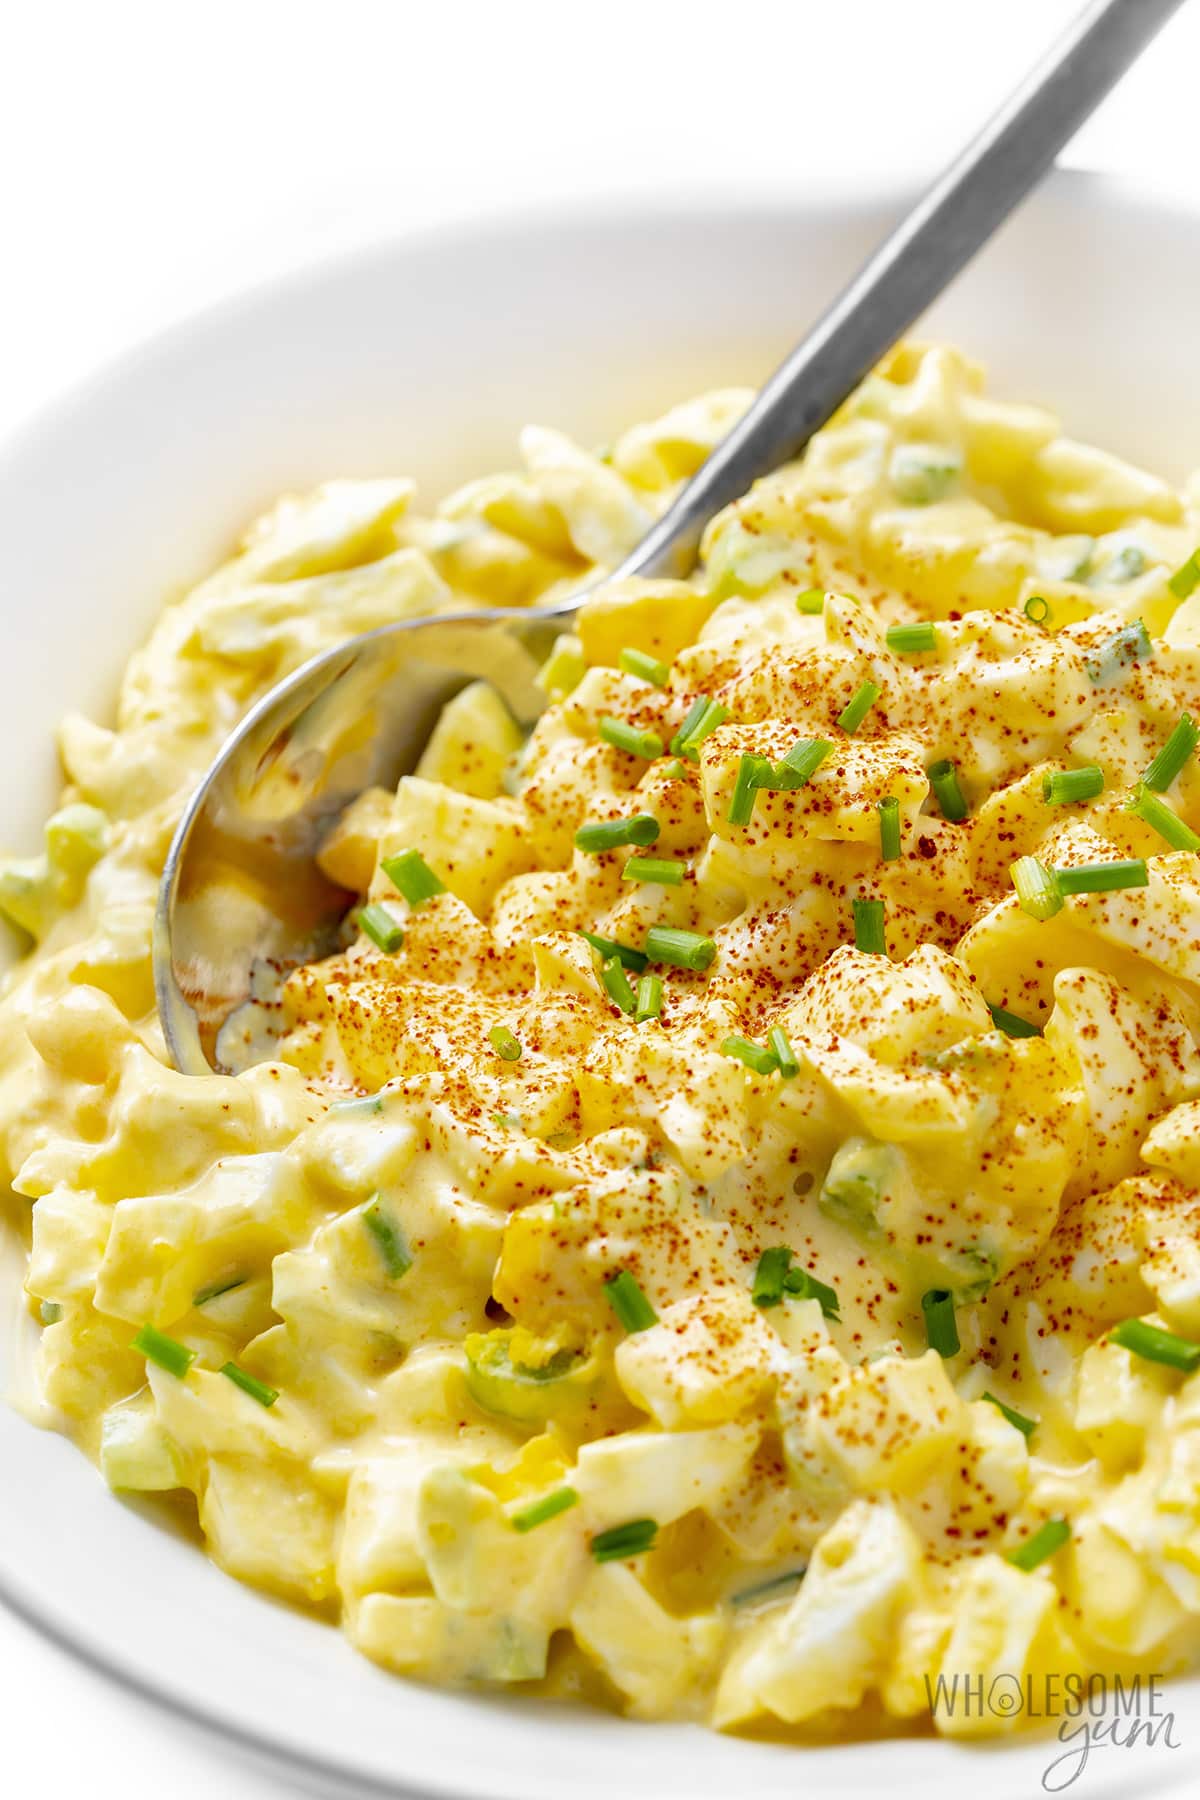 The best egg salad recipe in a bowl with a spoon.